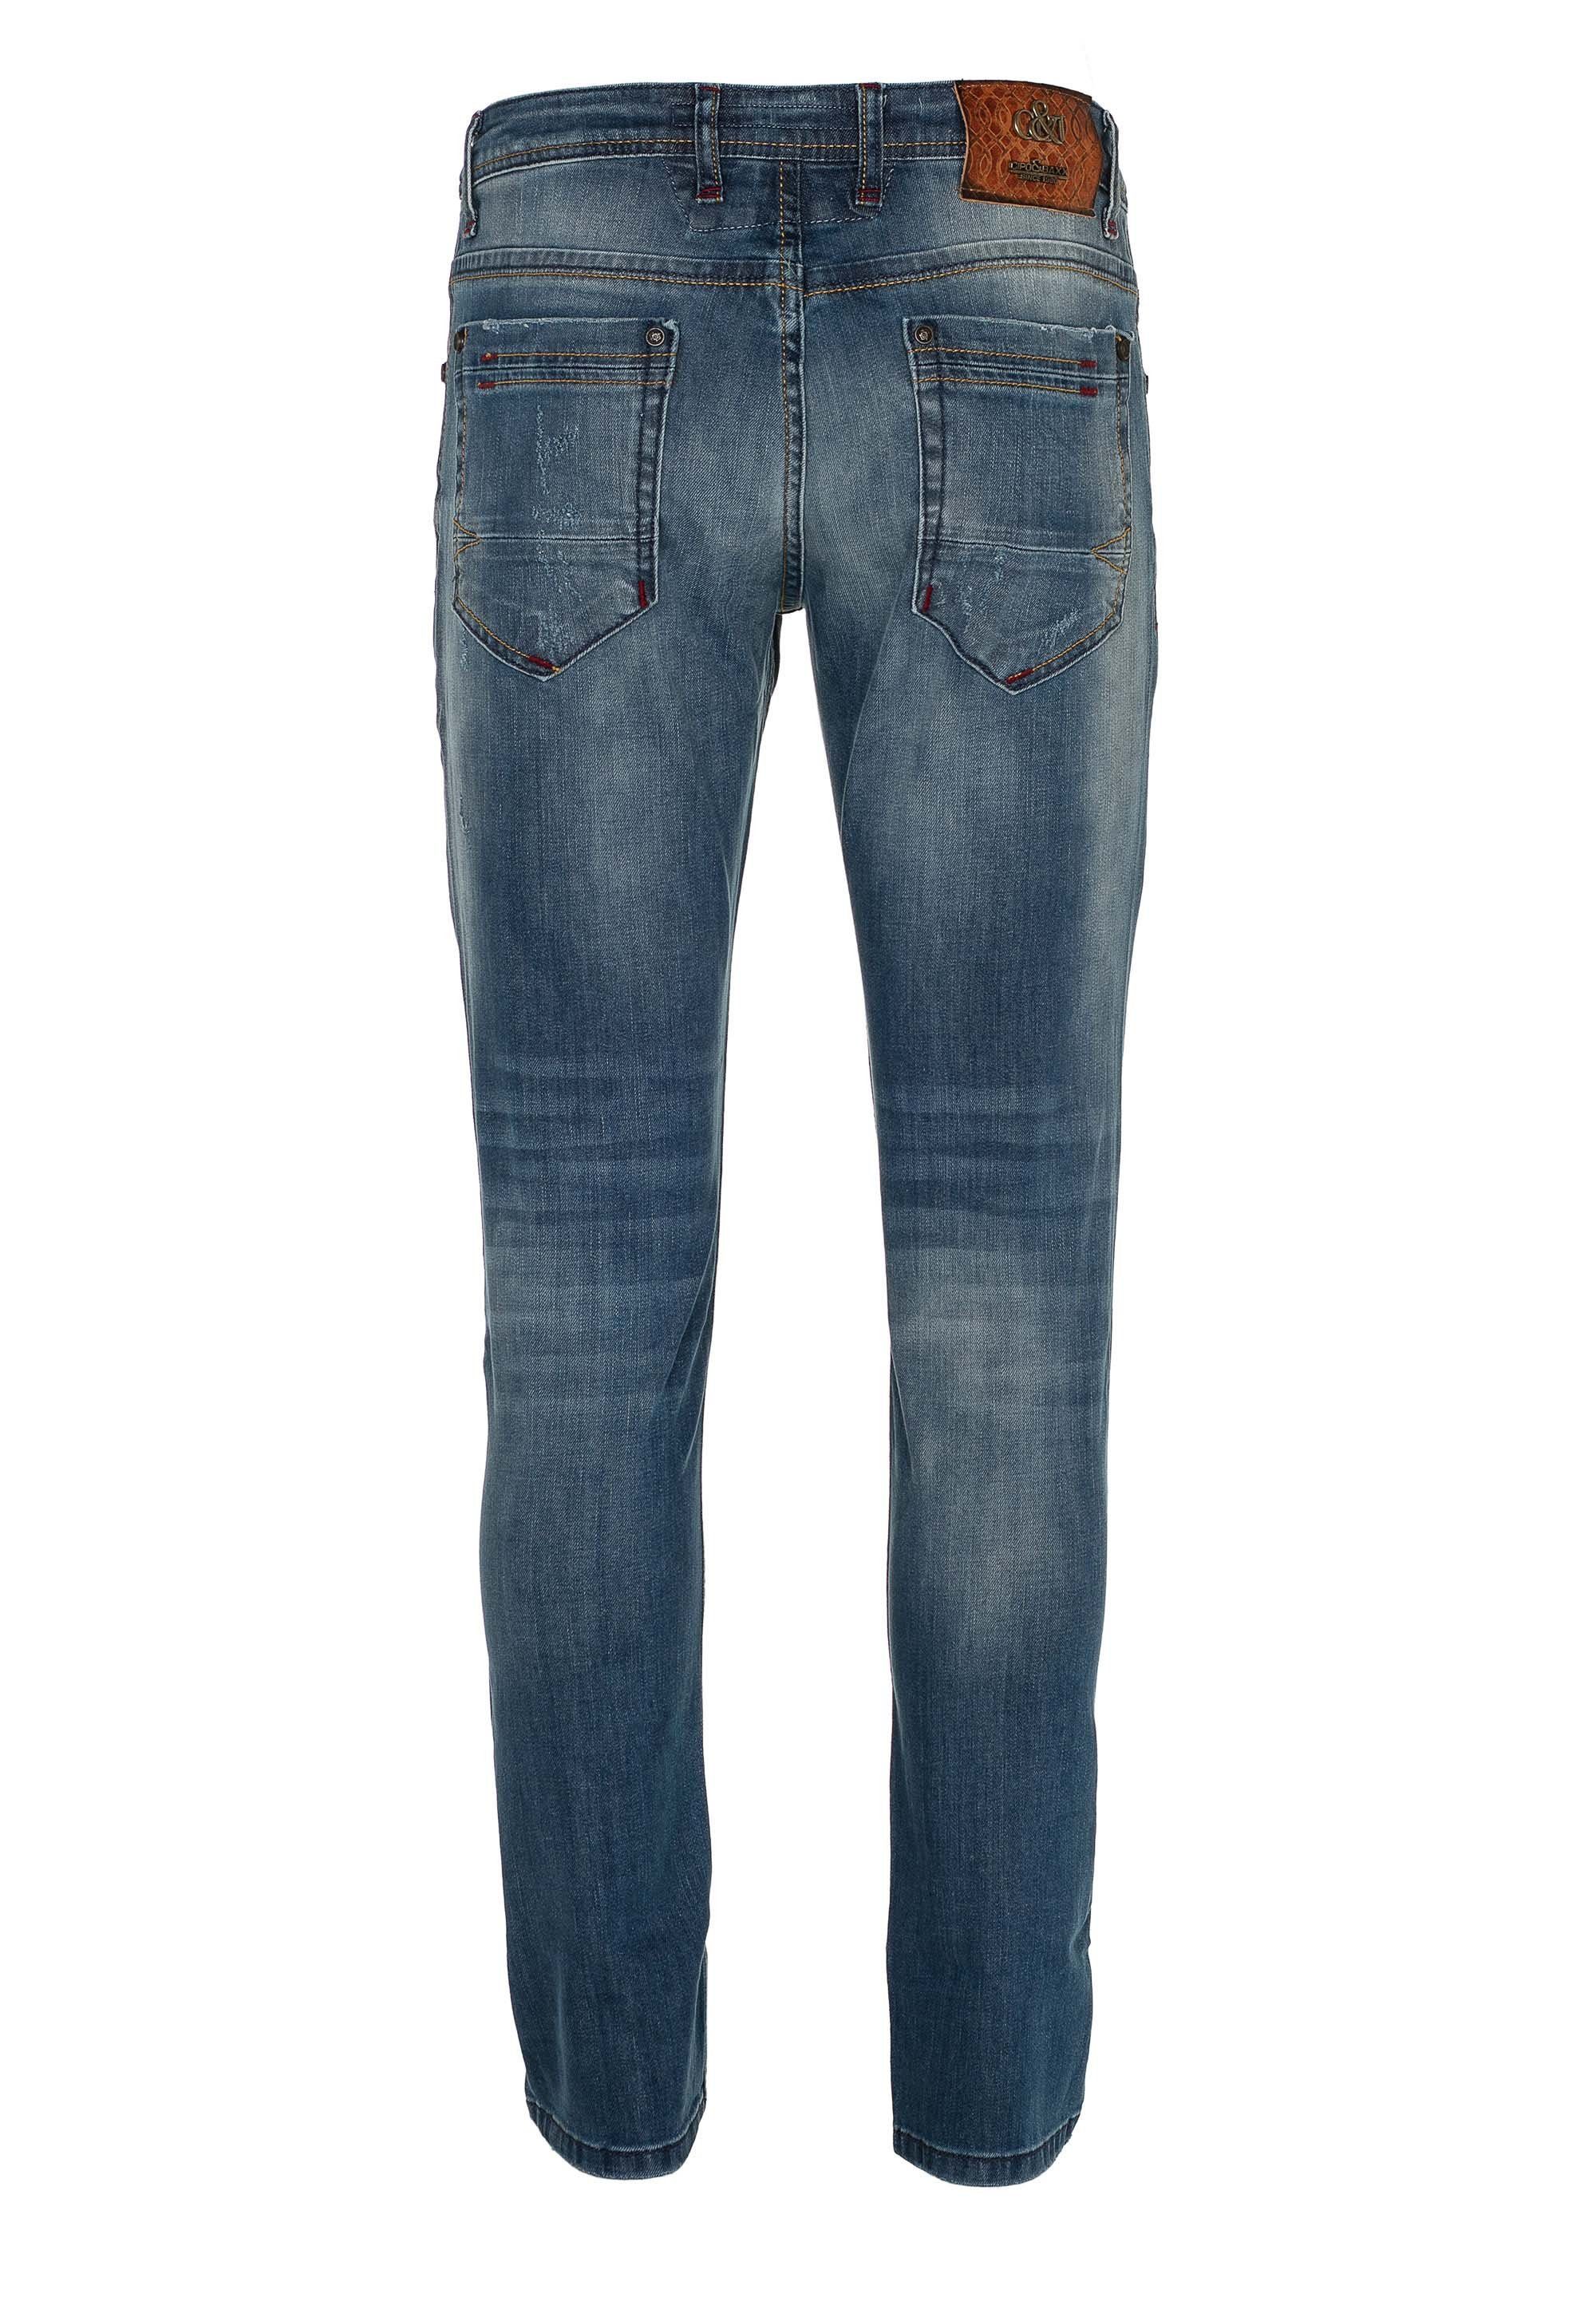 n im Straight Cipo Baxx Fit & Destroyed-Look Bequeme Jeans